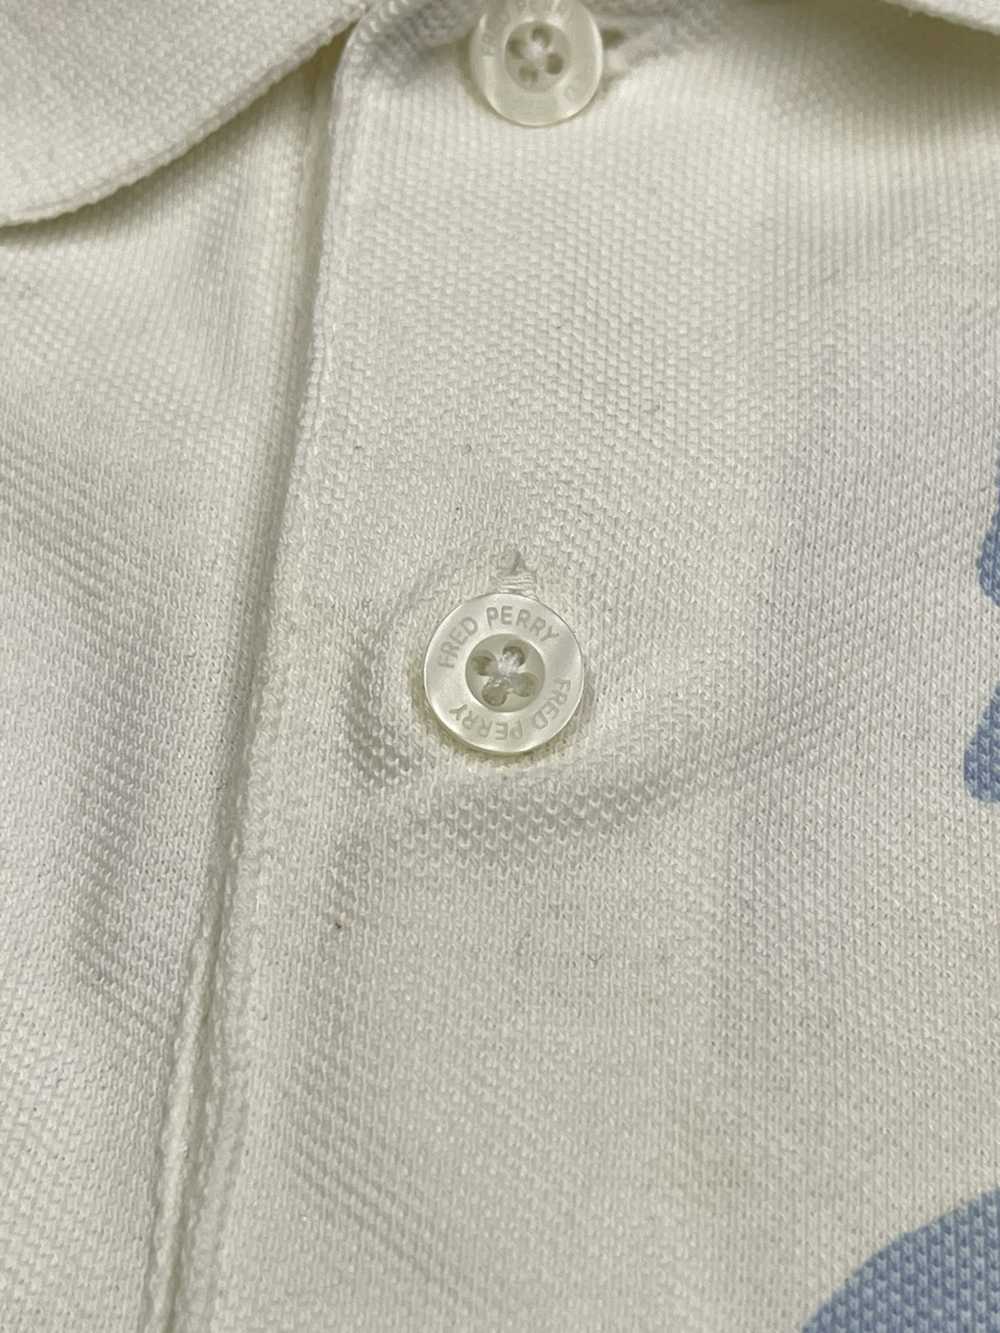 Fred Perry × Rare × Vintage Rare Vintage Fred Per… - image 7